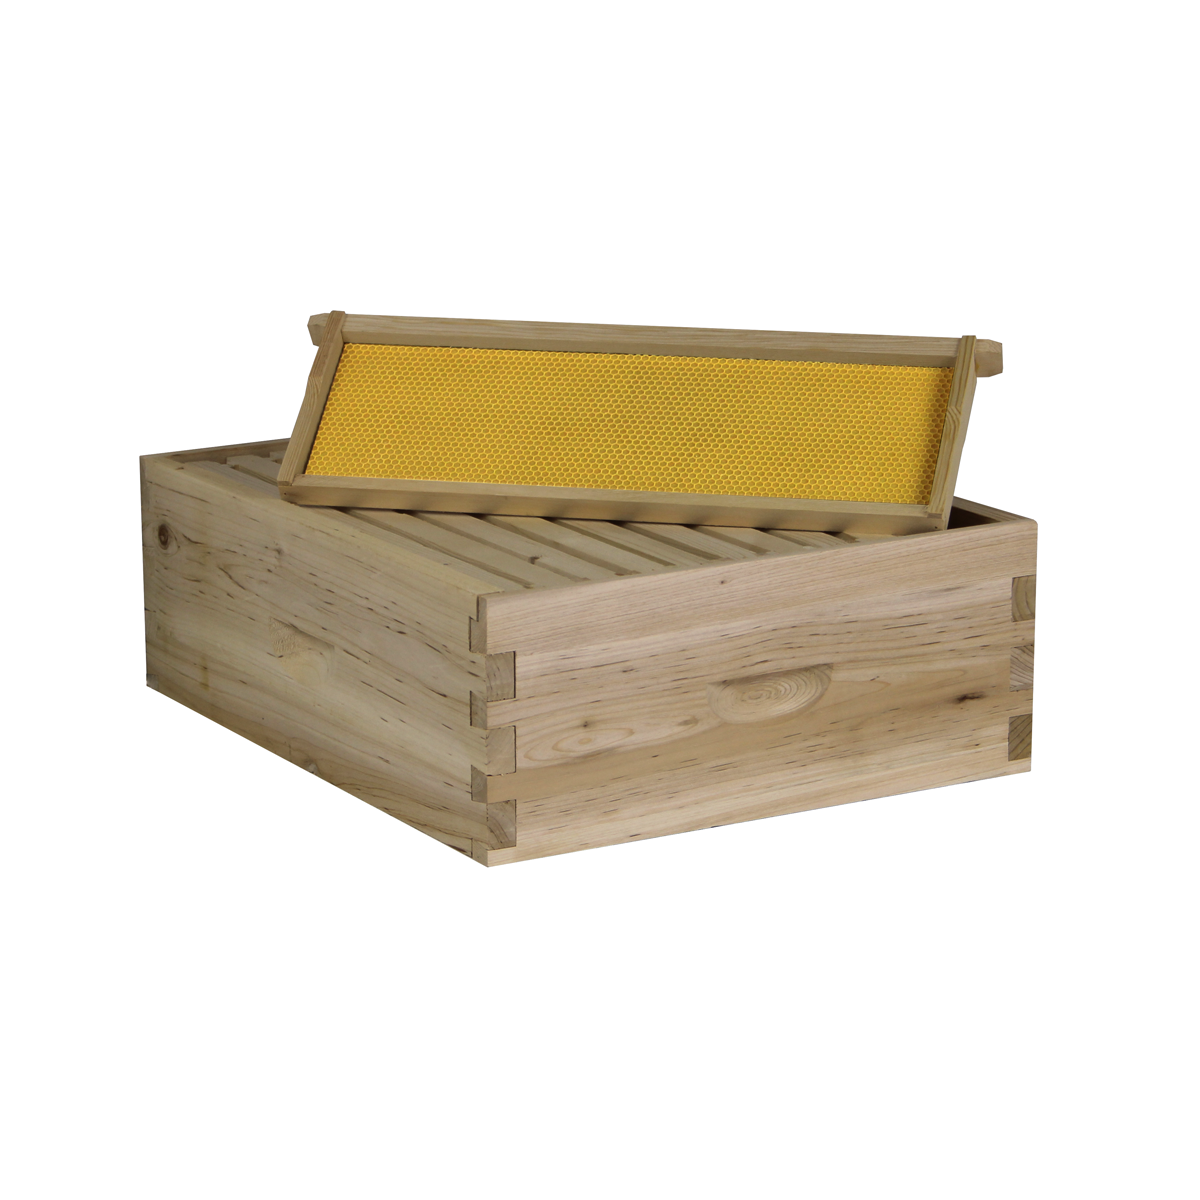 10 Frame Medium Honey Super Box w/ Dovetail Joints (Unassembled w/ Frames and Foundations)